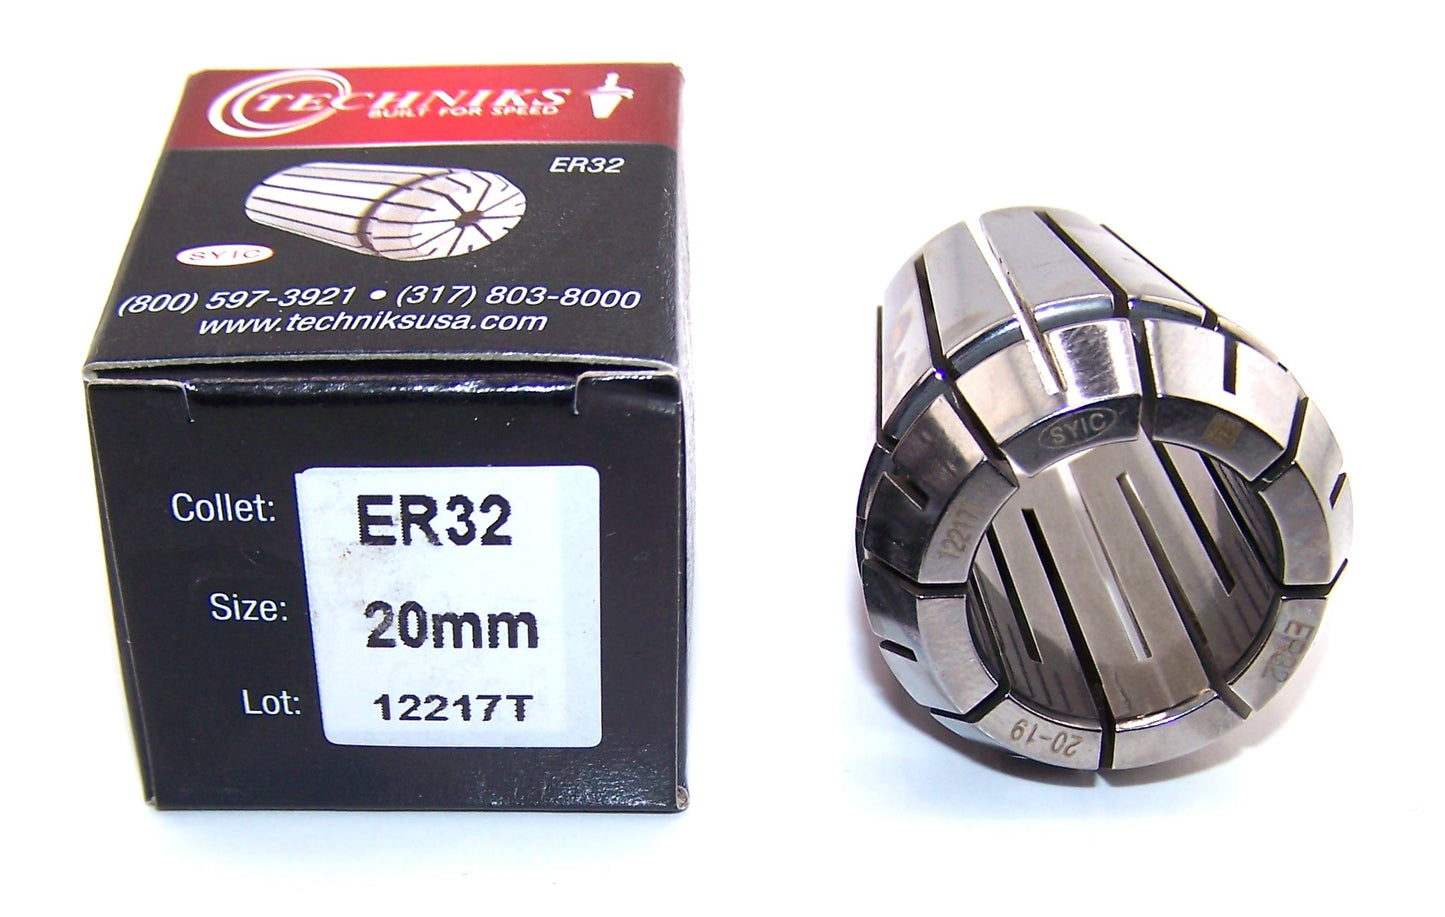 ER32 PRECISION COLLET 20mm from Techniks